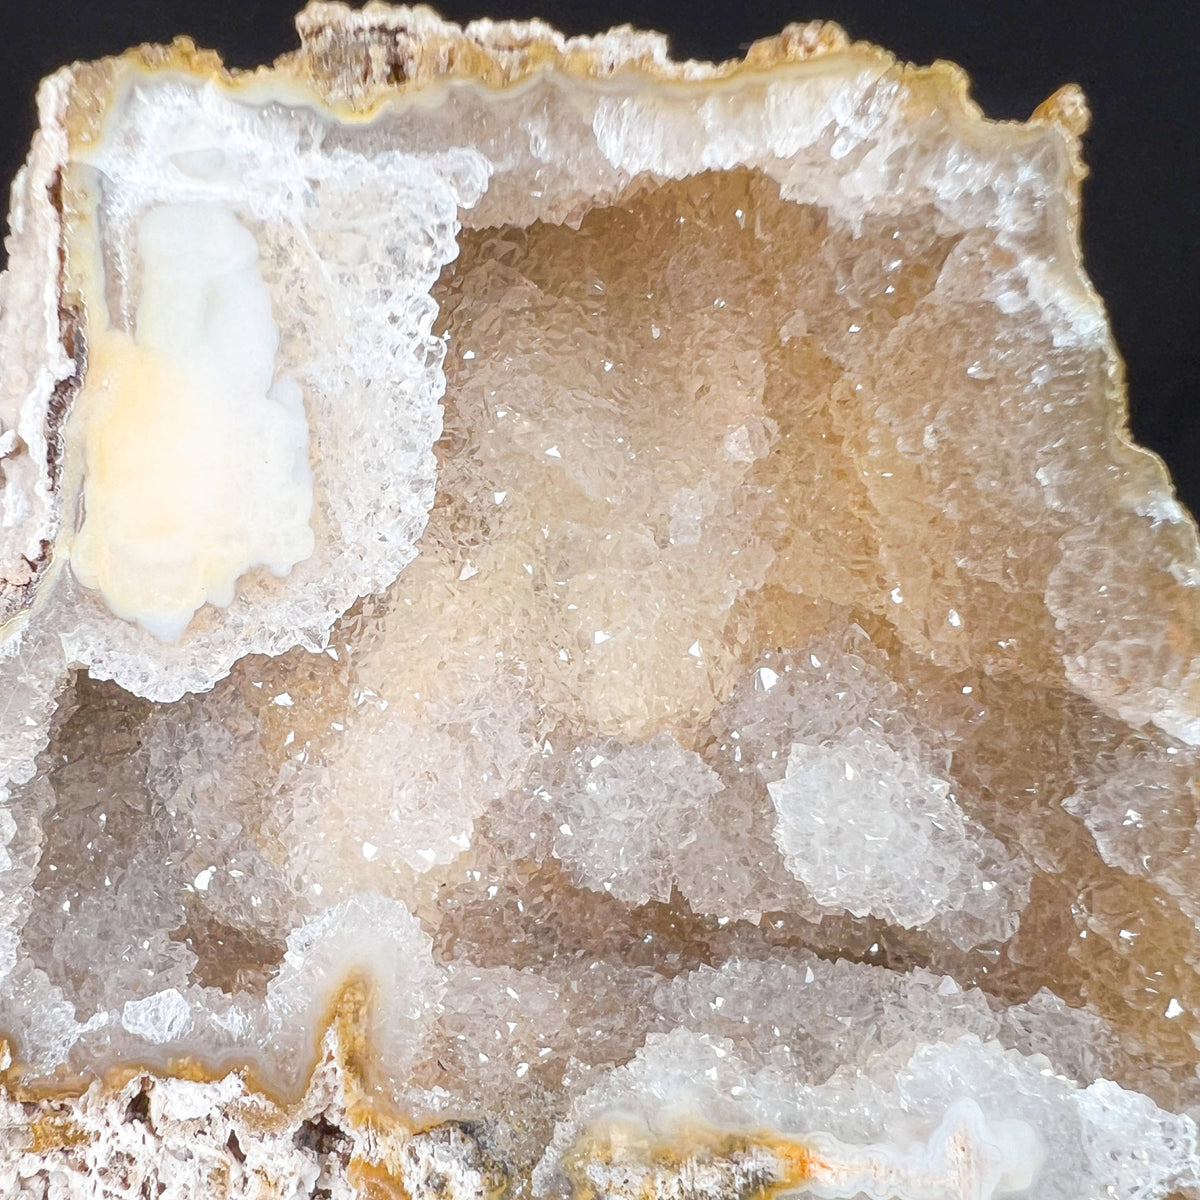 Drusy Quartz Crystals within Fossil Coral from Florida